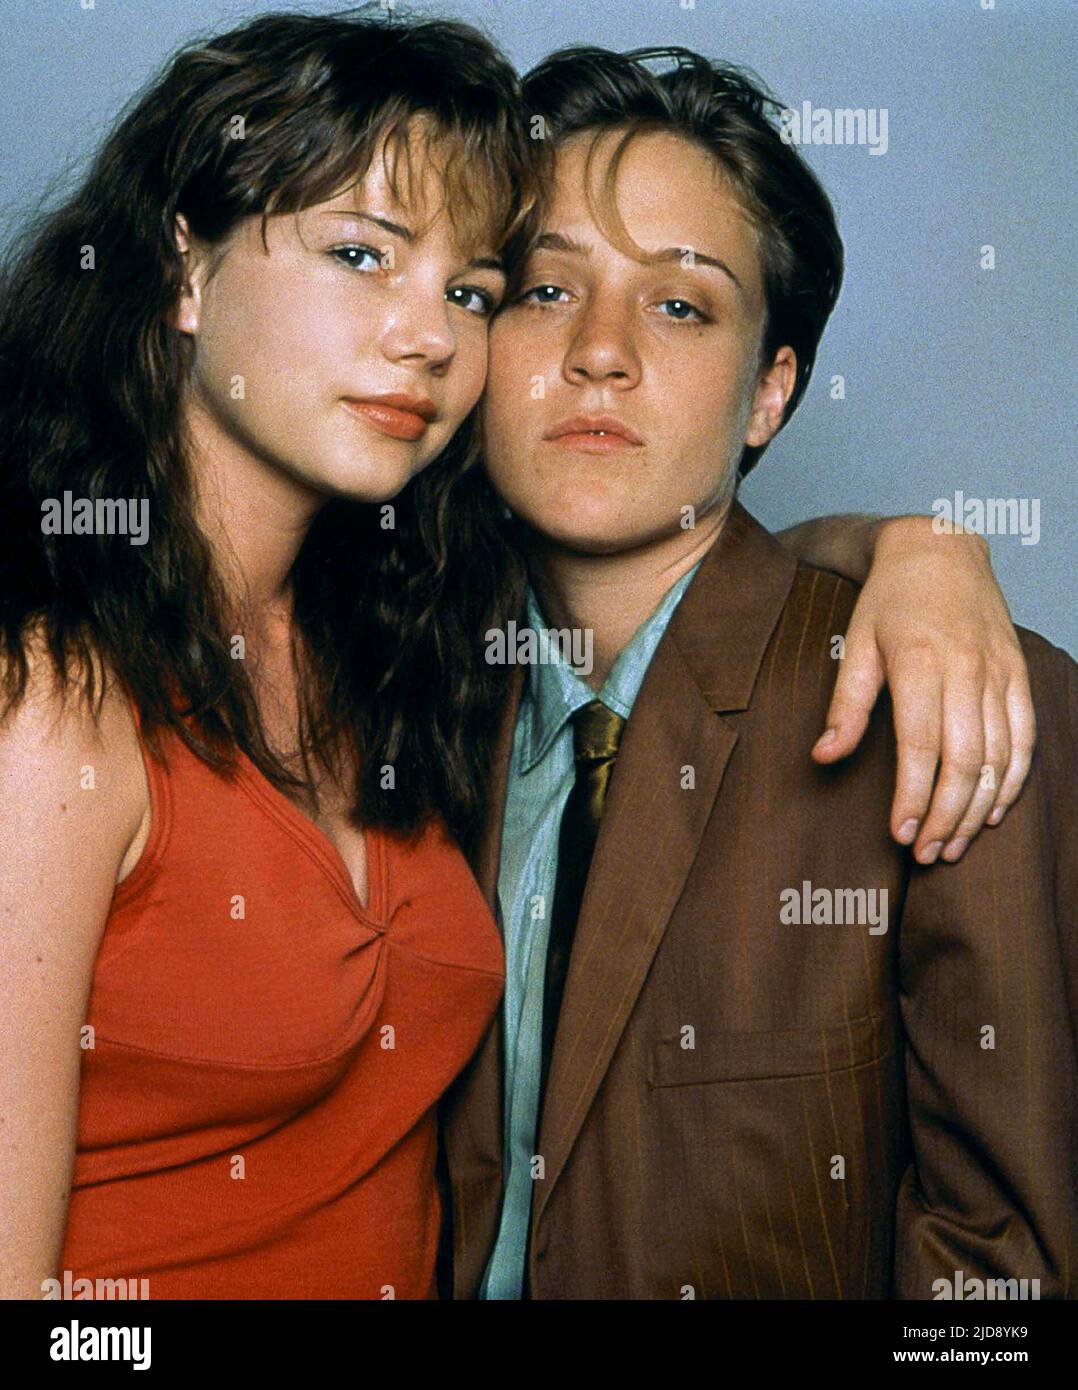 WILLIAMS,SEVIGNY, IF THESE WALLS COULD TALK 2, 2000, Stock Photo